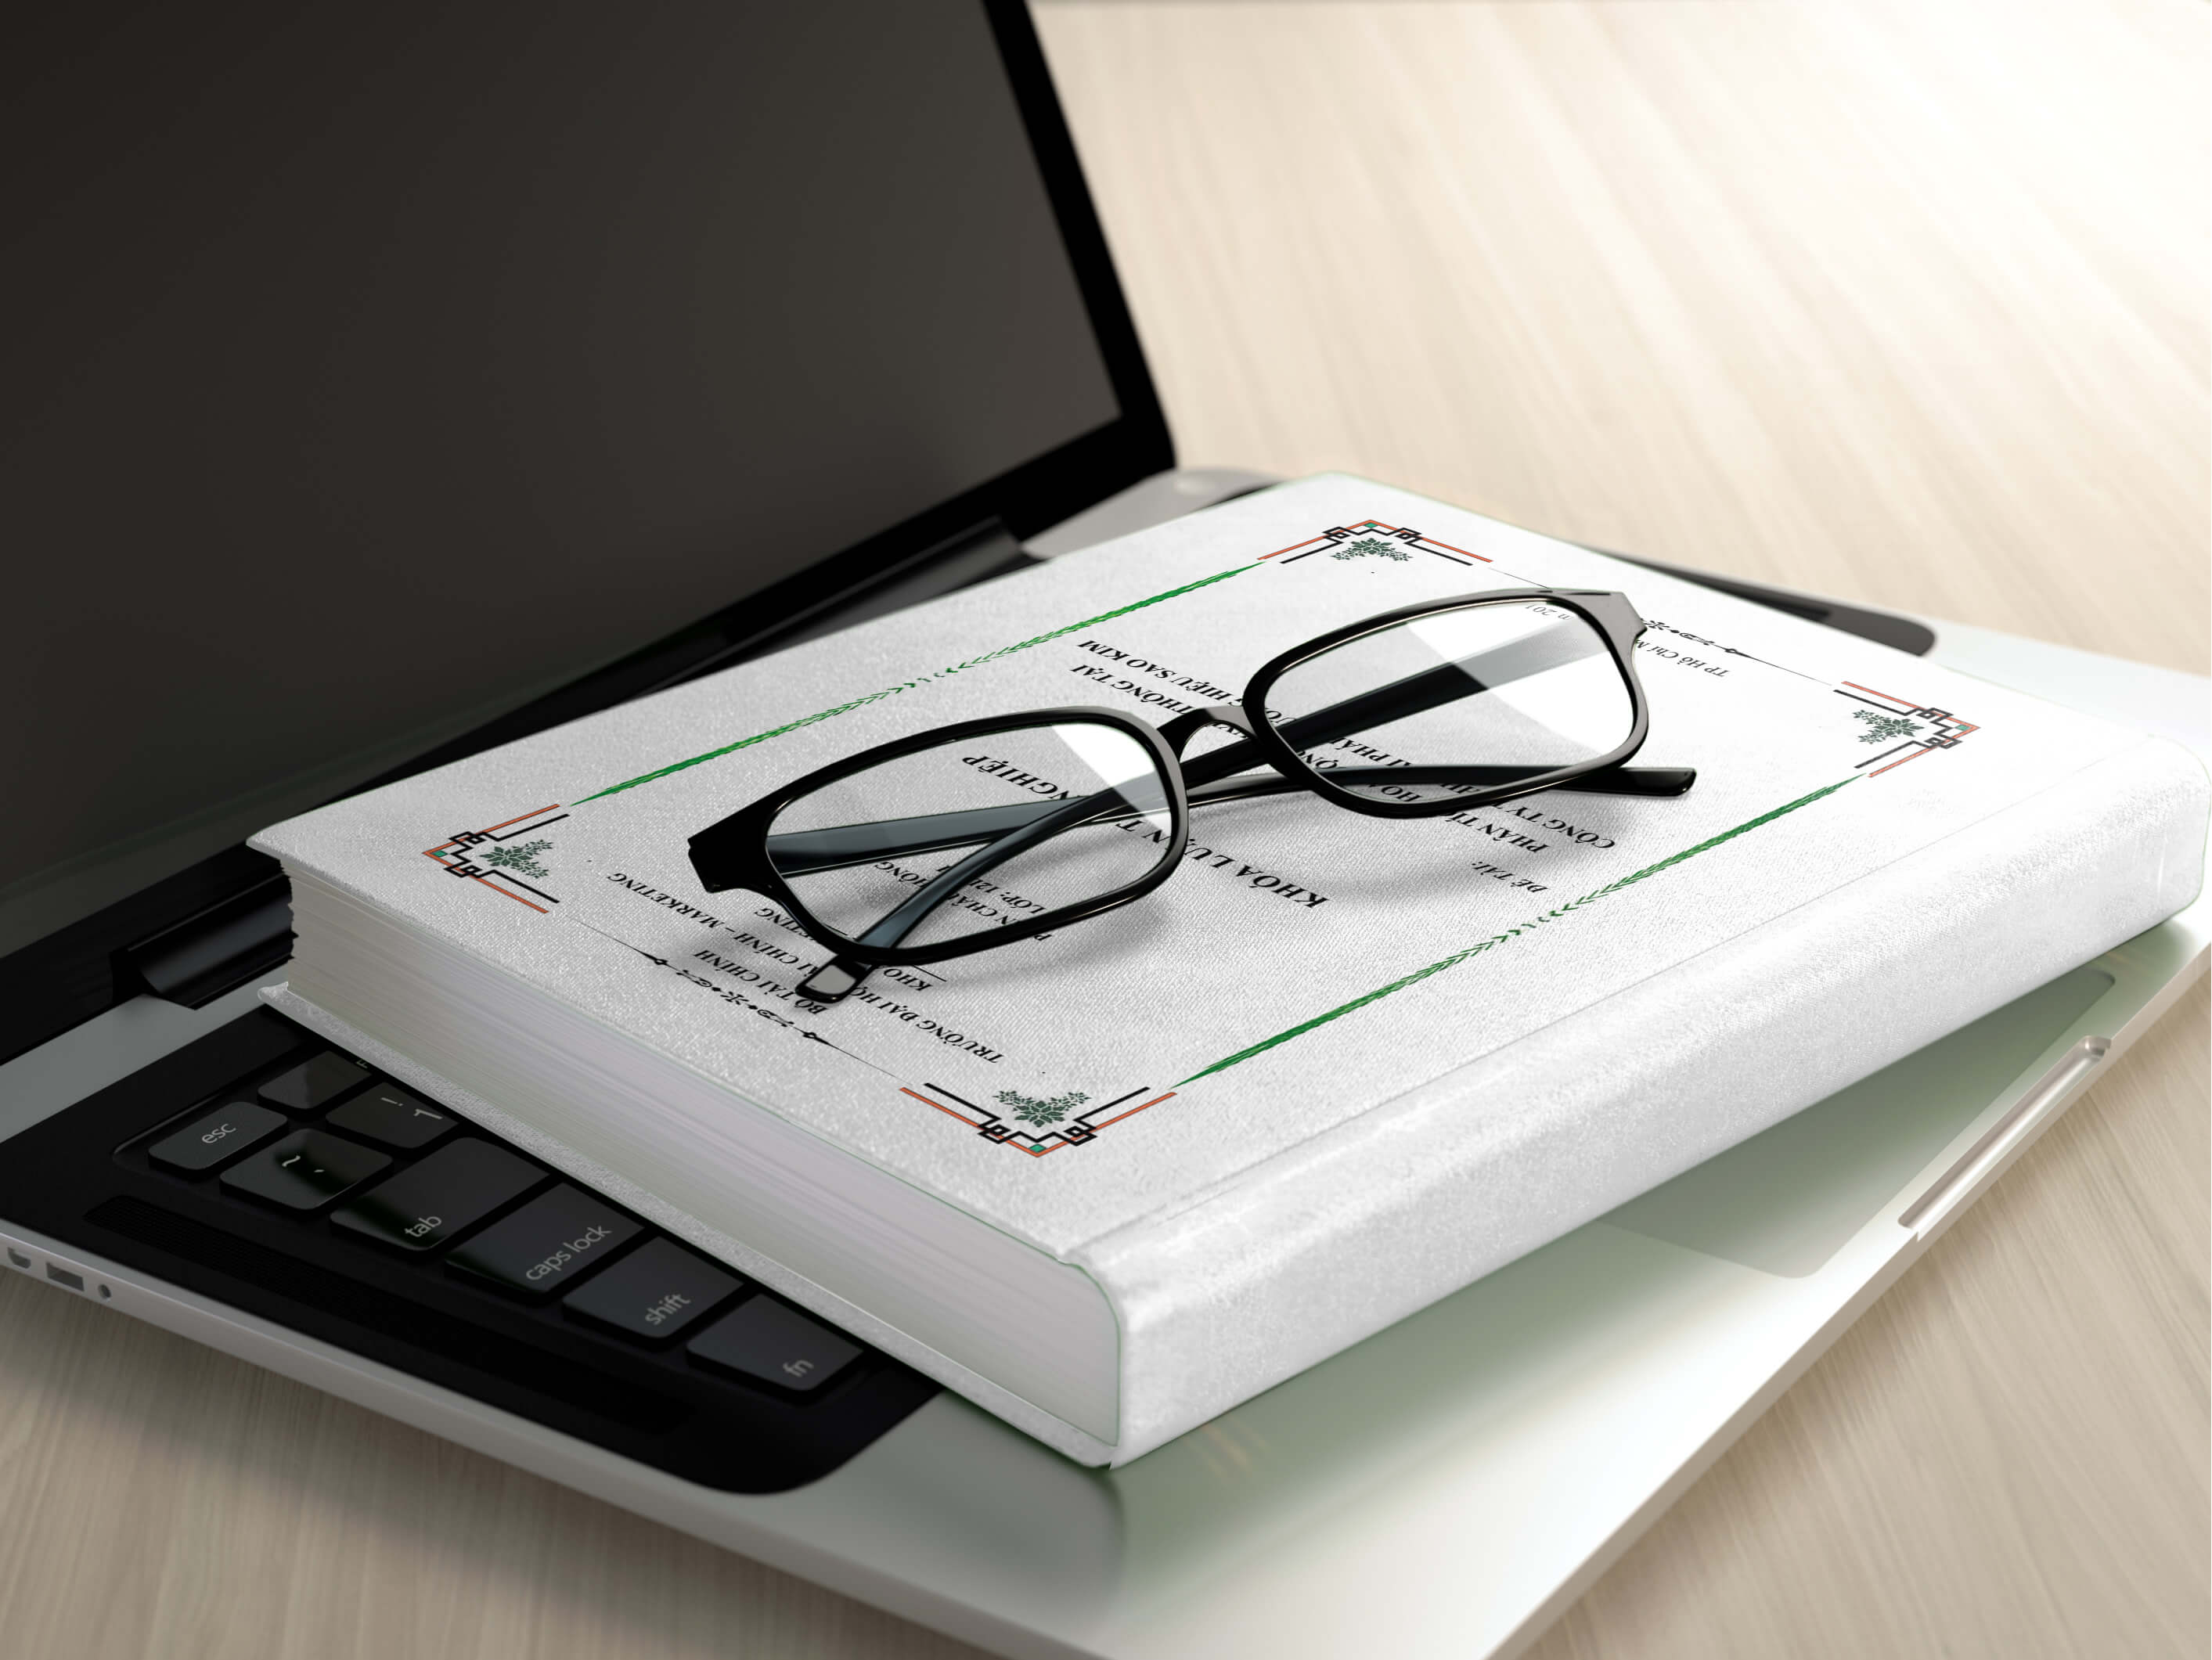 photo of reading glasses on a book on top of a laptop